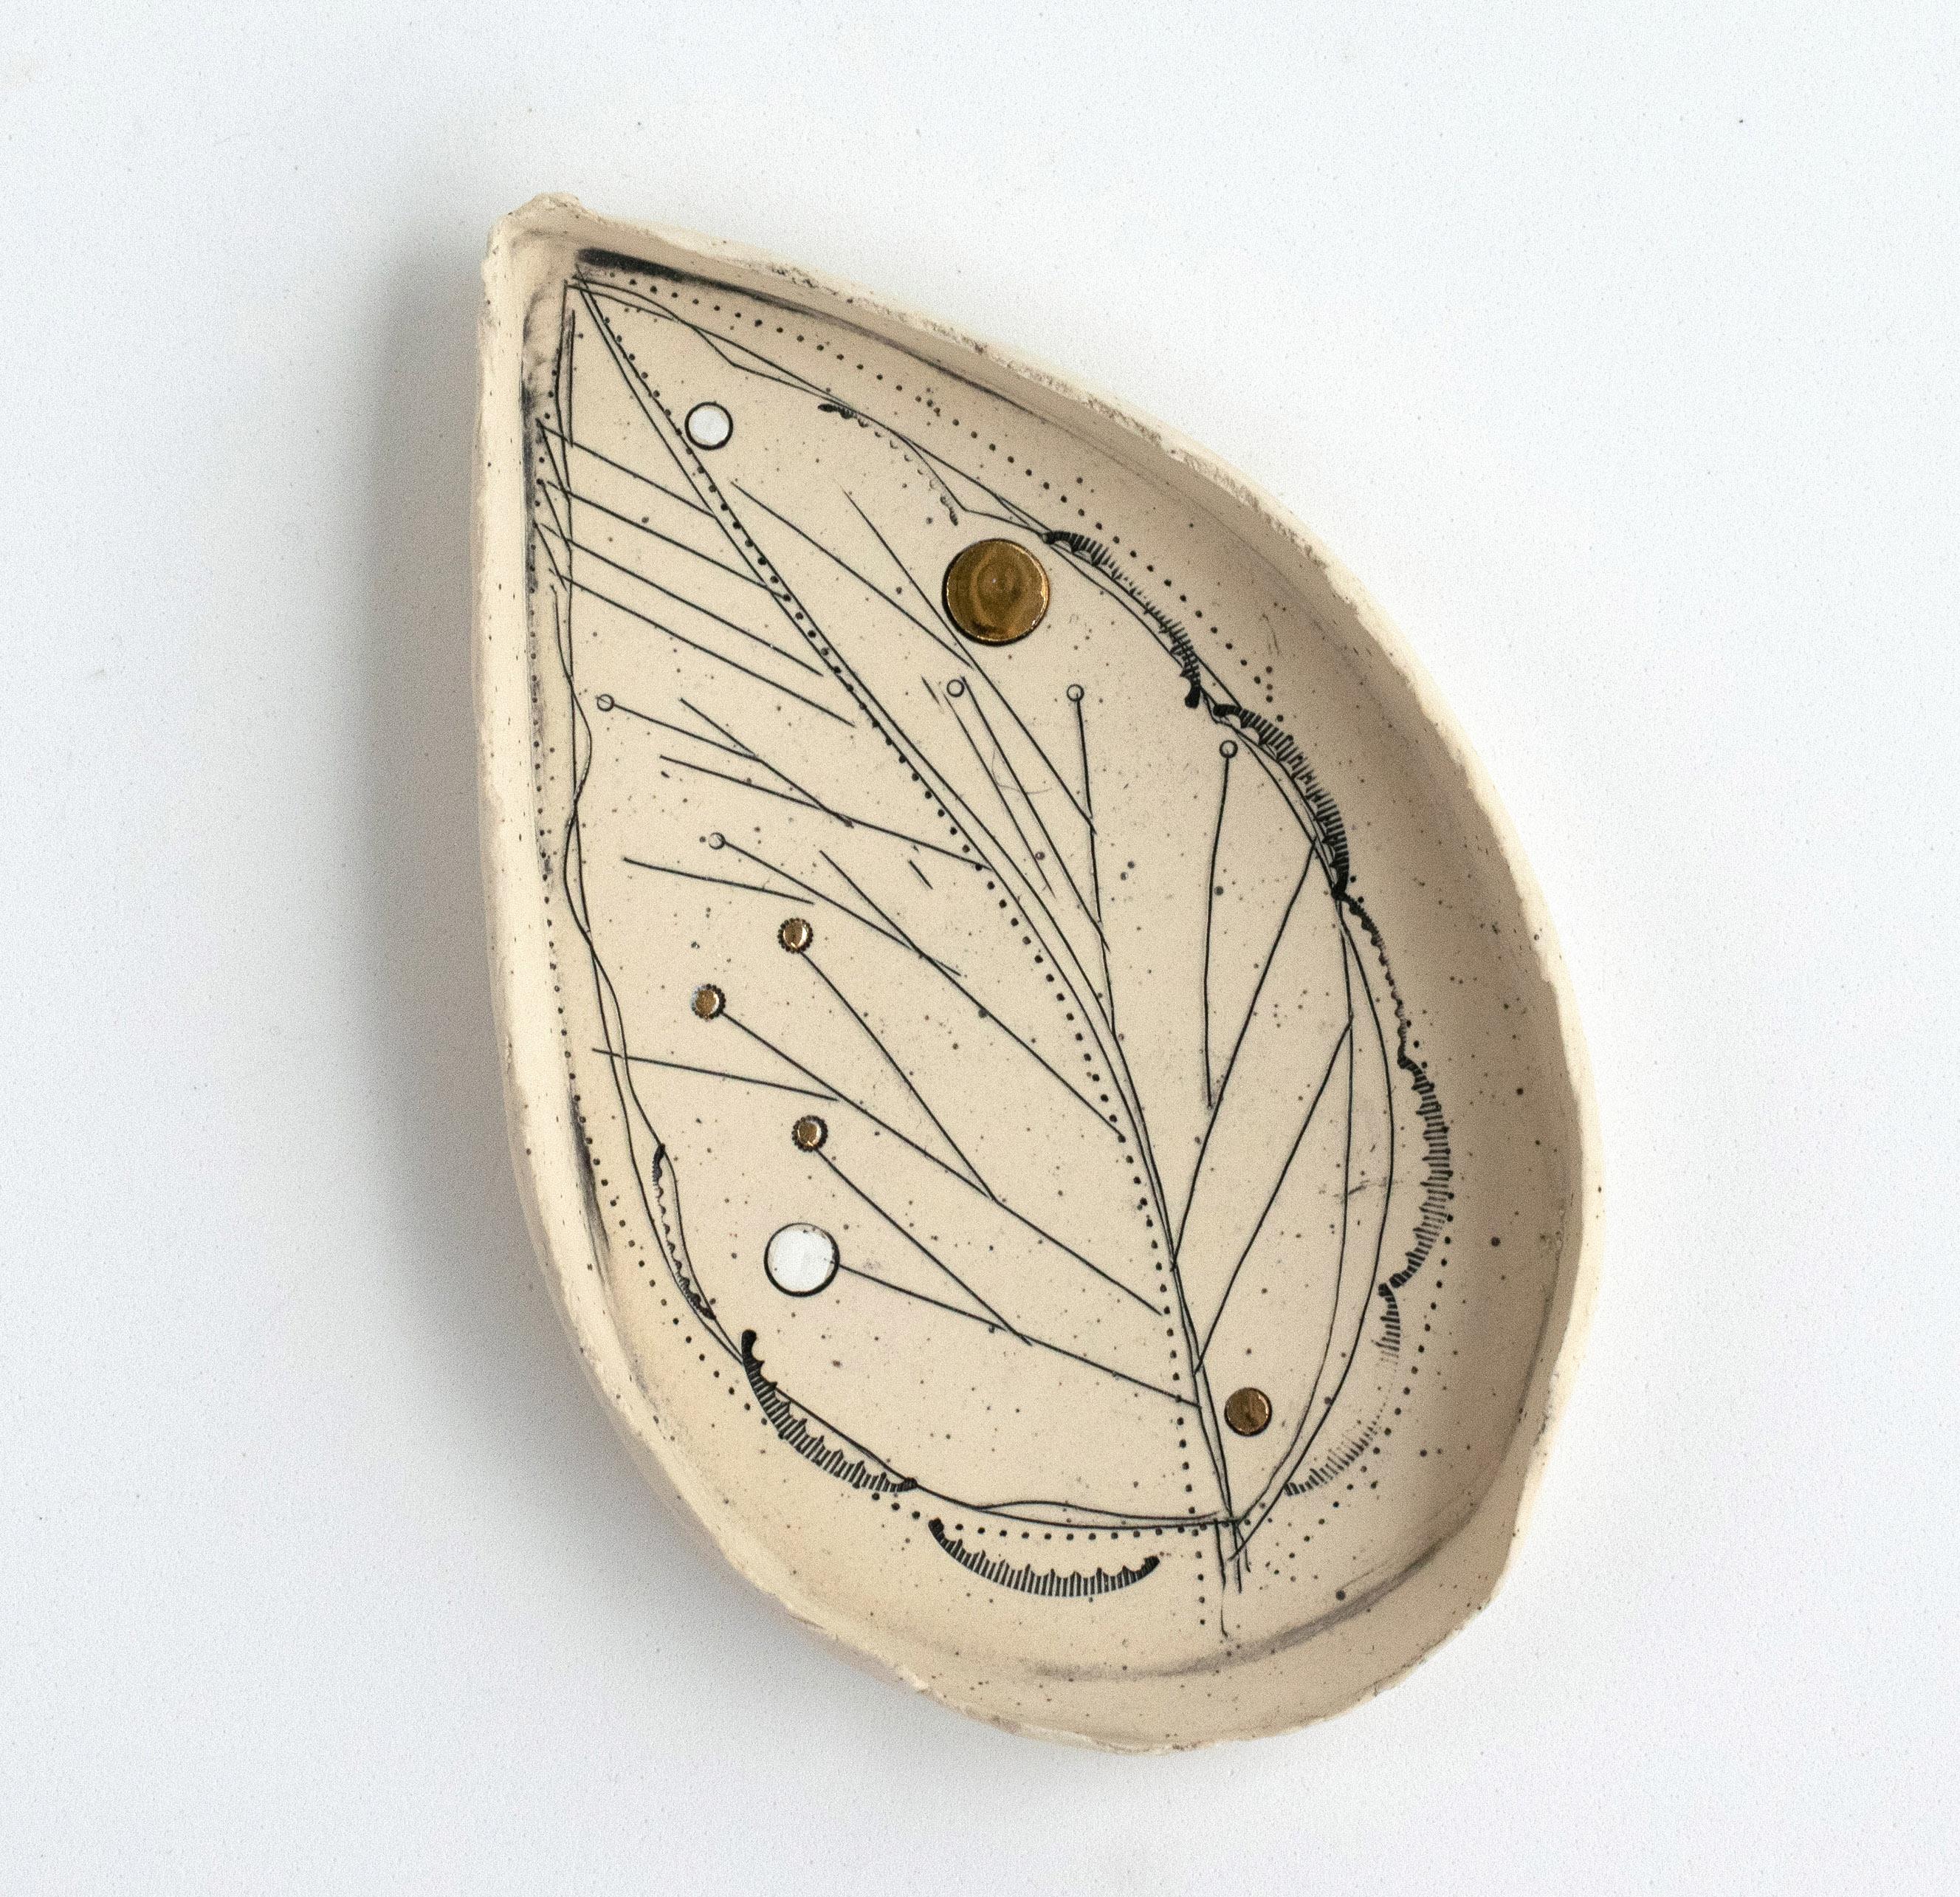  459-G Hand Crafted Golden Promise Leaf Dish With 22kt Gold Detail by Helen Prior

A delicate hand-crafted dish, organic in shape with a torn clay edge in natural speckled stoneware clay.
Part of the Golden Promise Series-  a theme of abstracted and